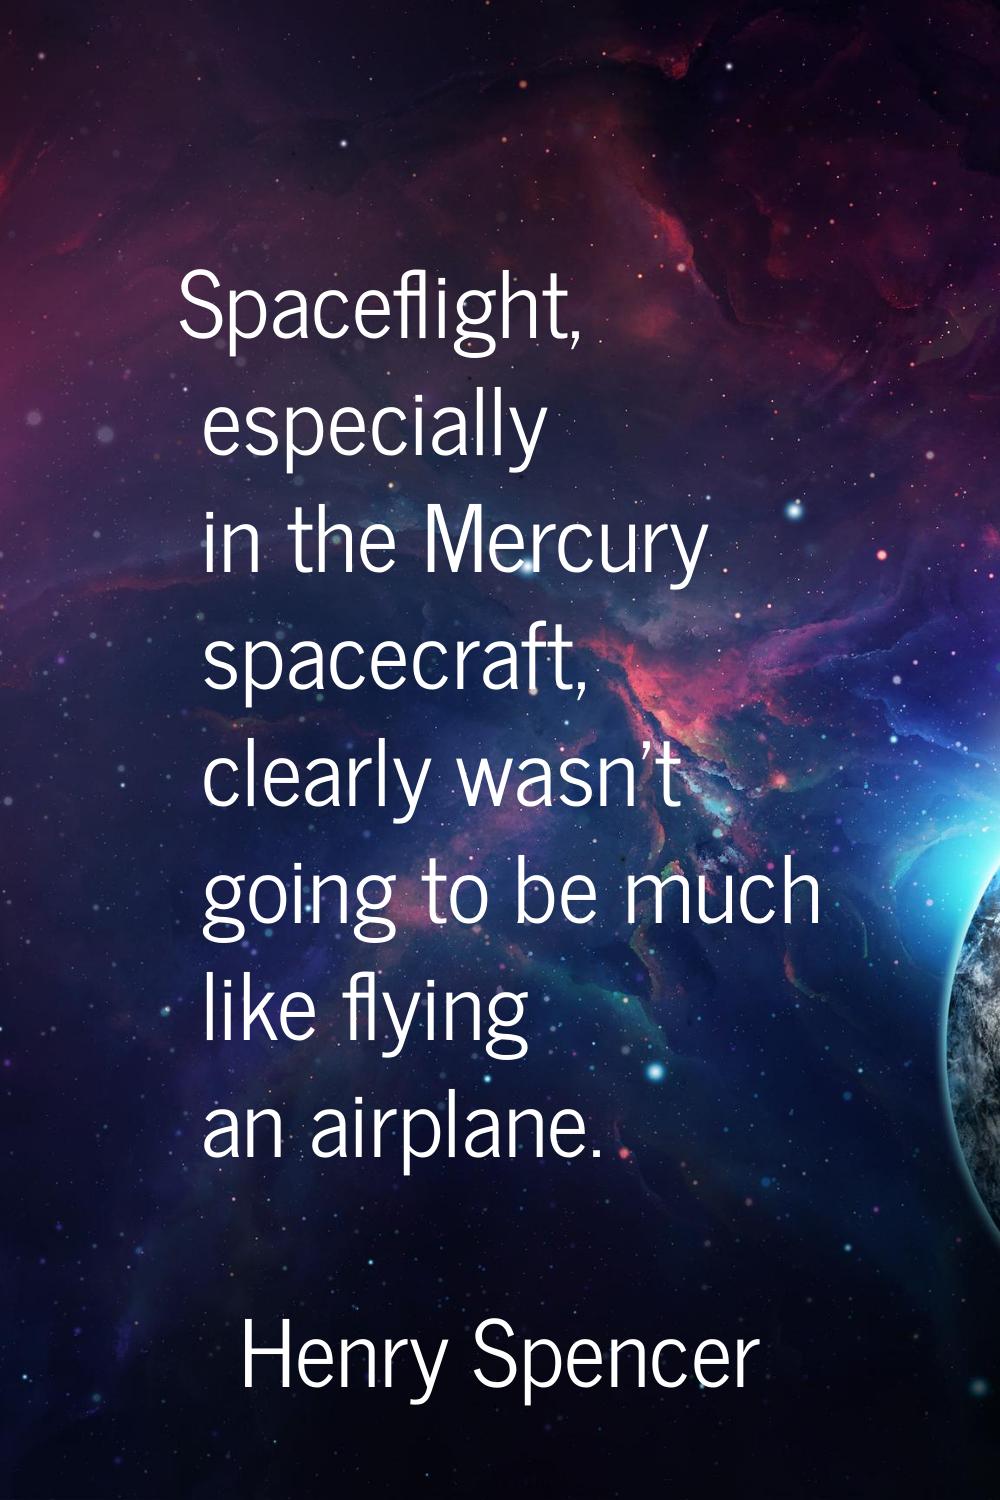 Spaceflight, especially in the Mercury spacecraft, clearly wasn't going to be much like flying an a